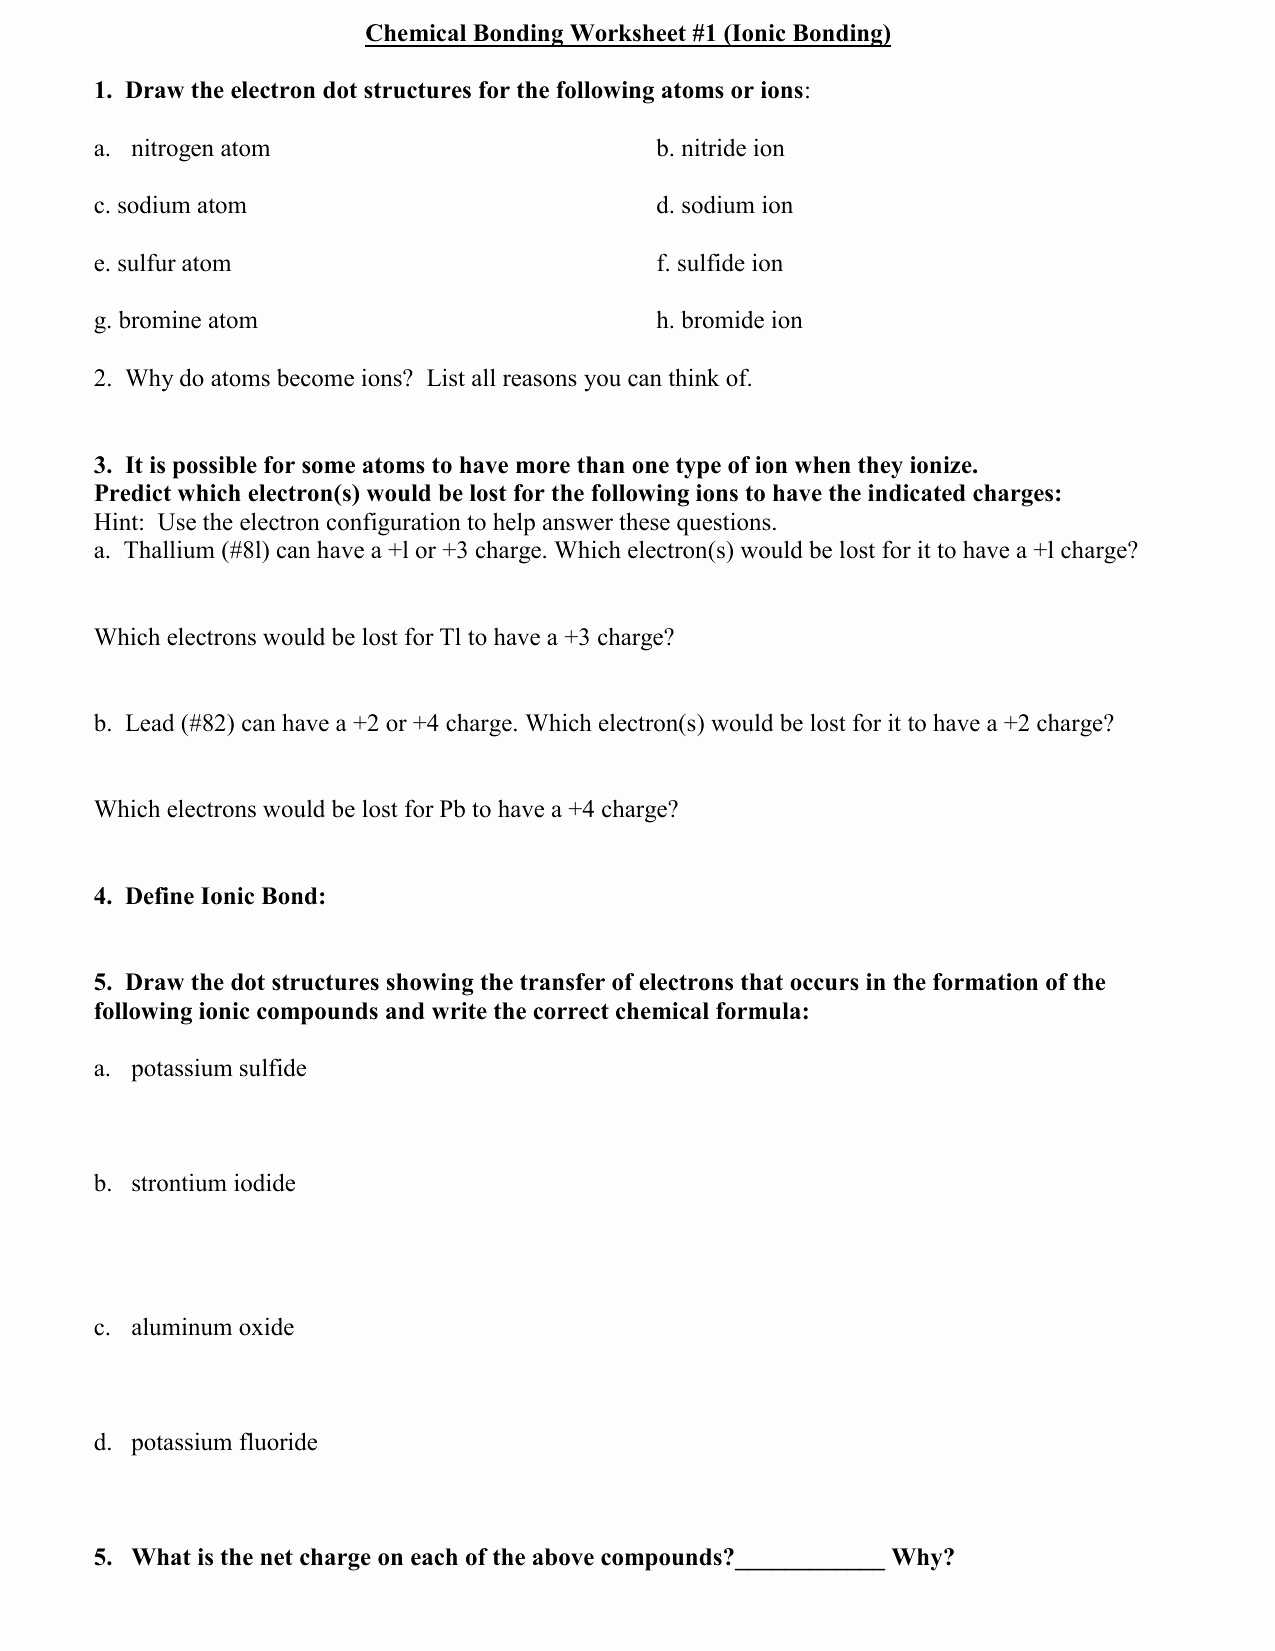 Ions and Ionic Compounds Worksheet Answer Key or Chemical Bonding Worksheet Answer Key 6 3 Periodic Trends Worksheet